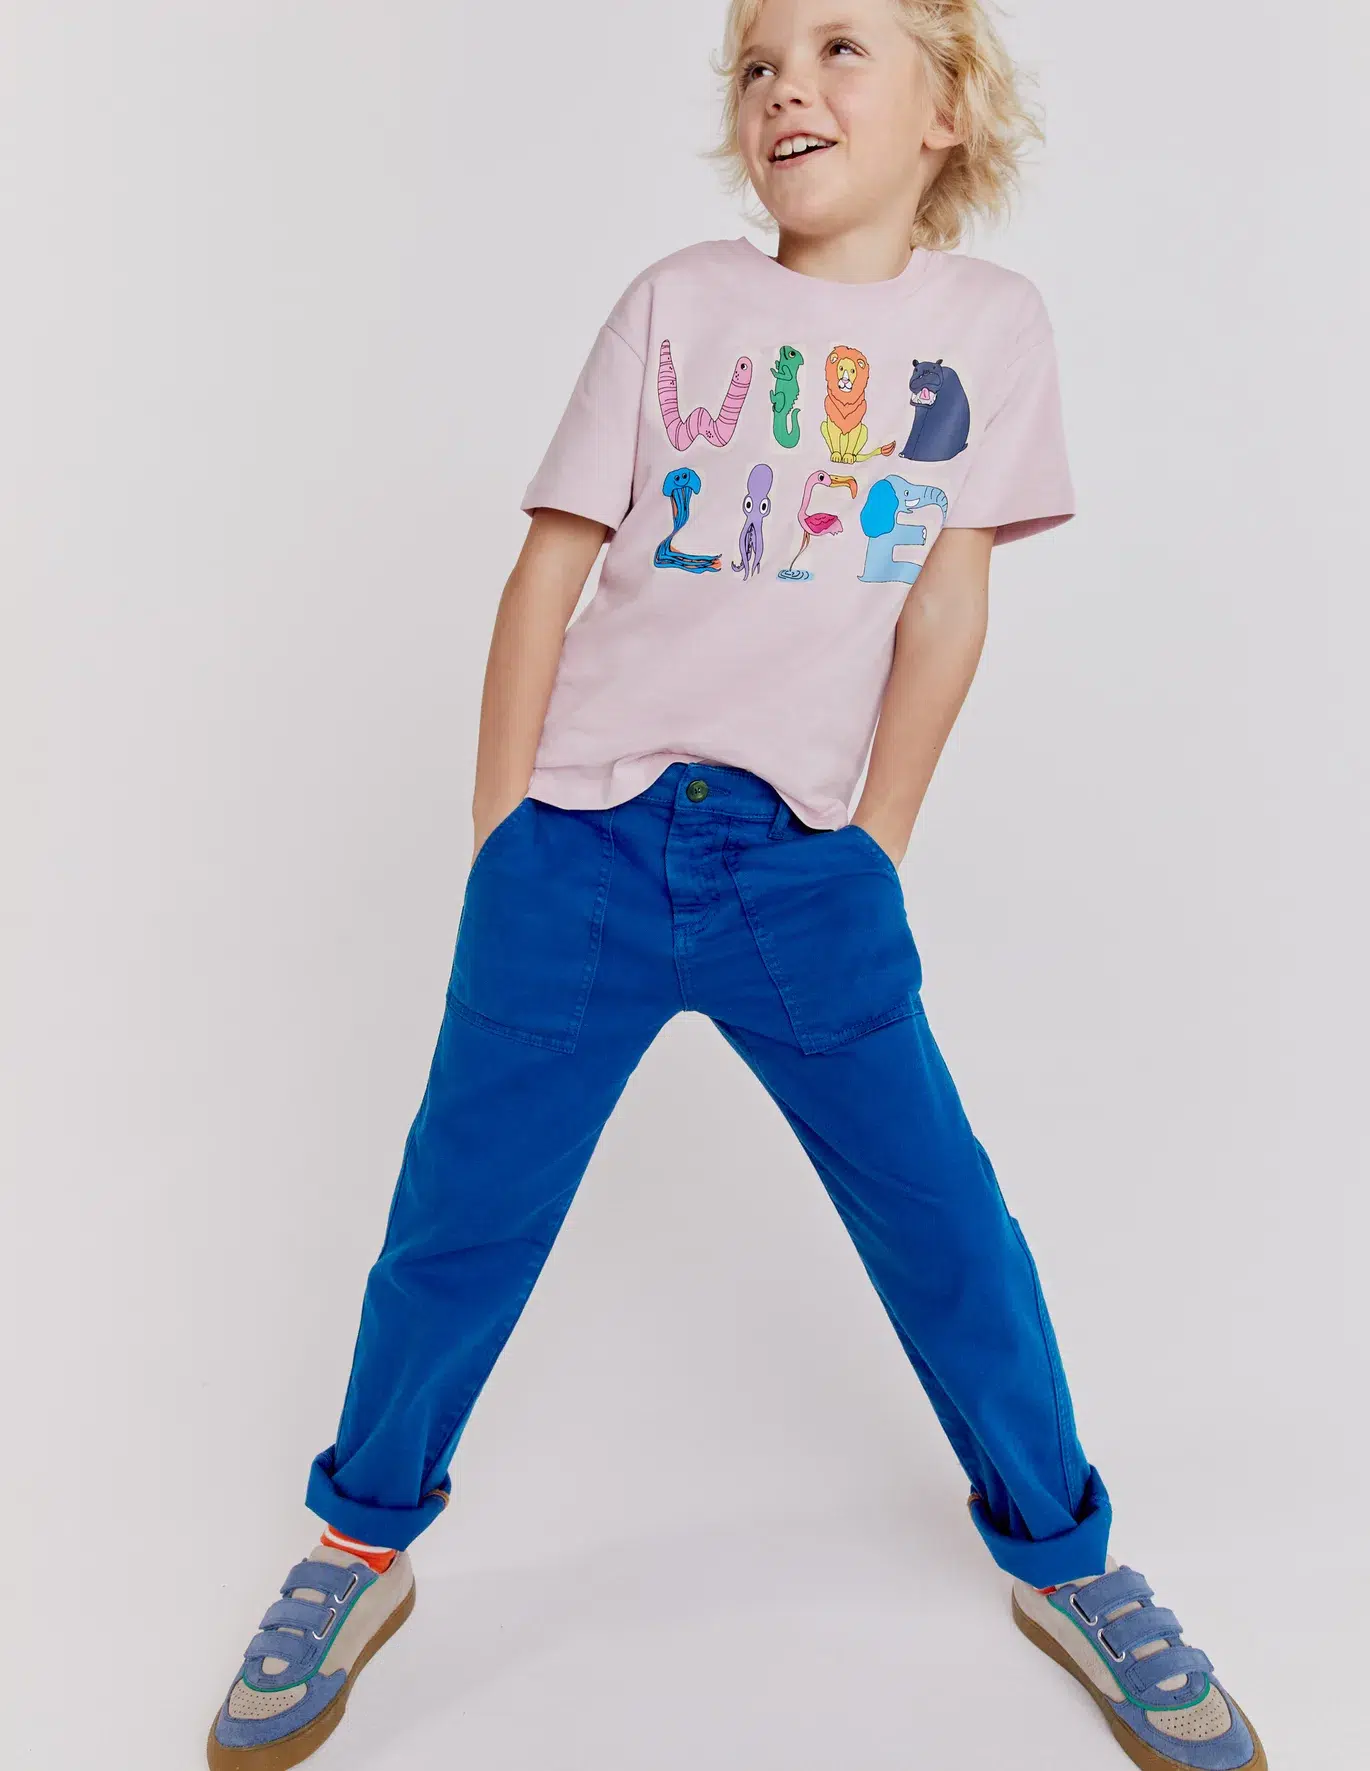 A boy in a graphic tee and blue pants has his hands in his pockets and smiles. 